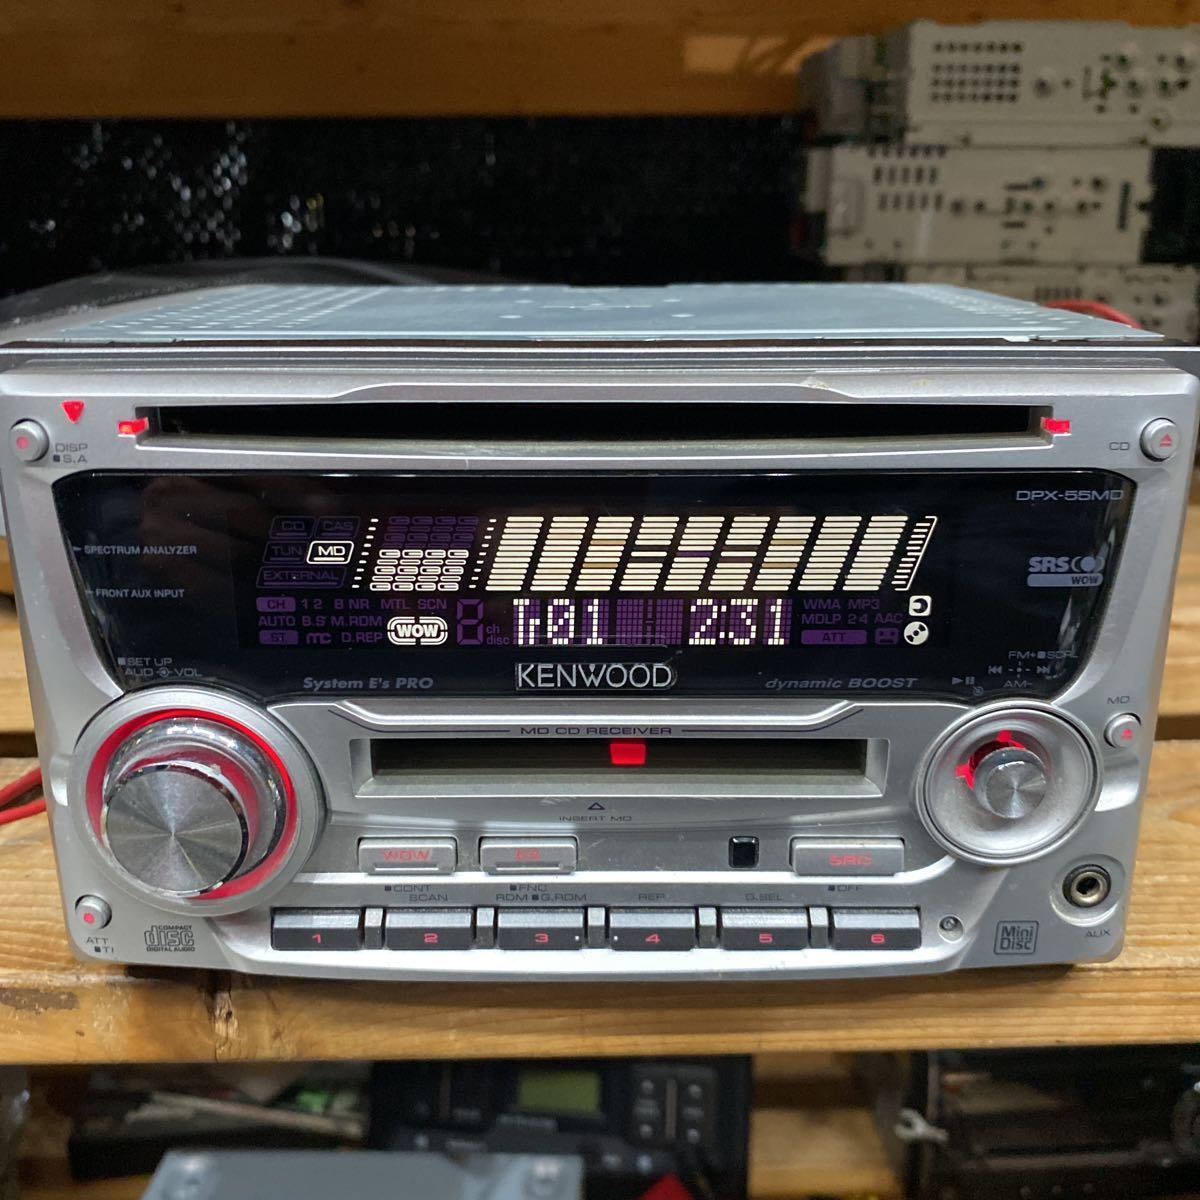 KENWOOD CD/MDレシーバー　AUX DPX-55MD_画像1